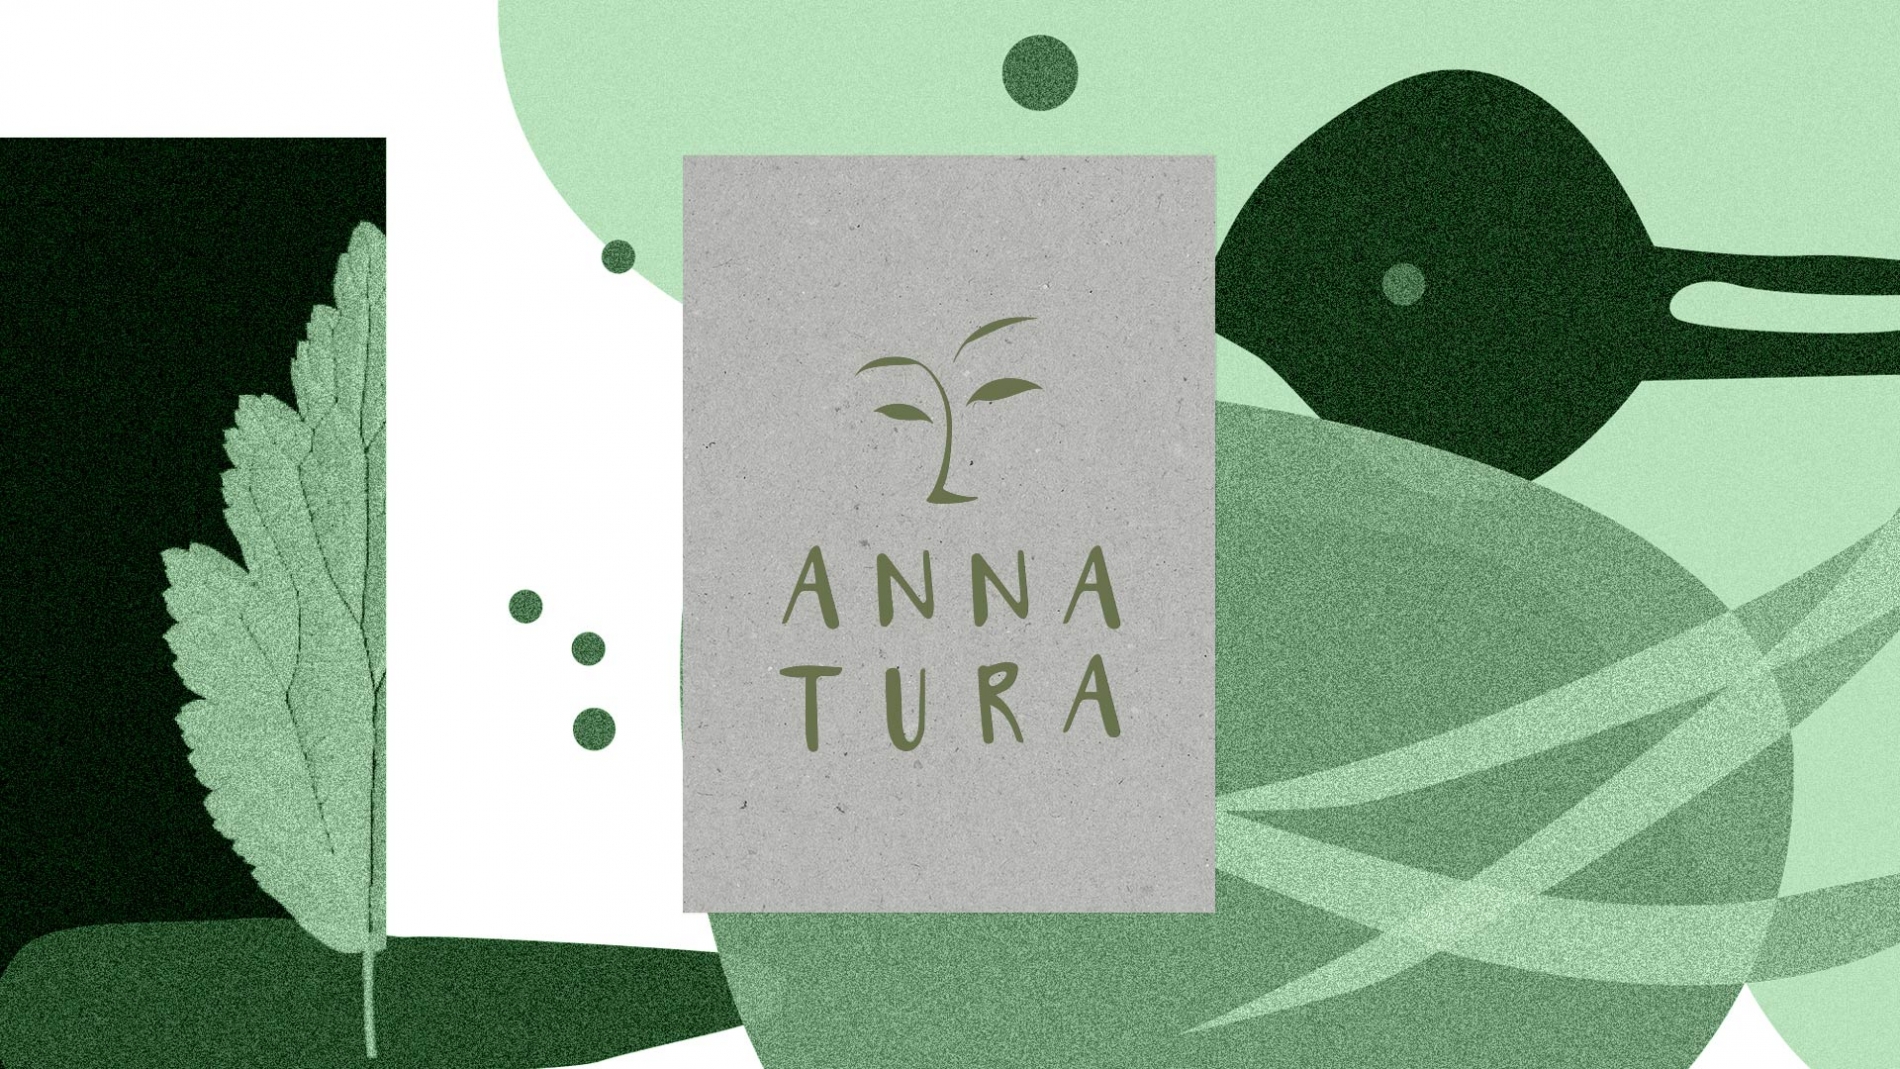 Let’s go green with Annatura